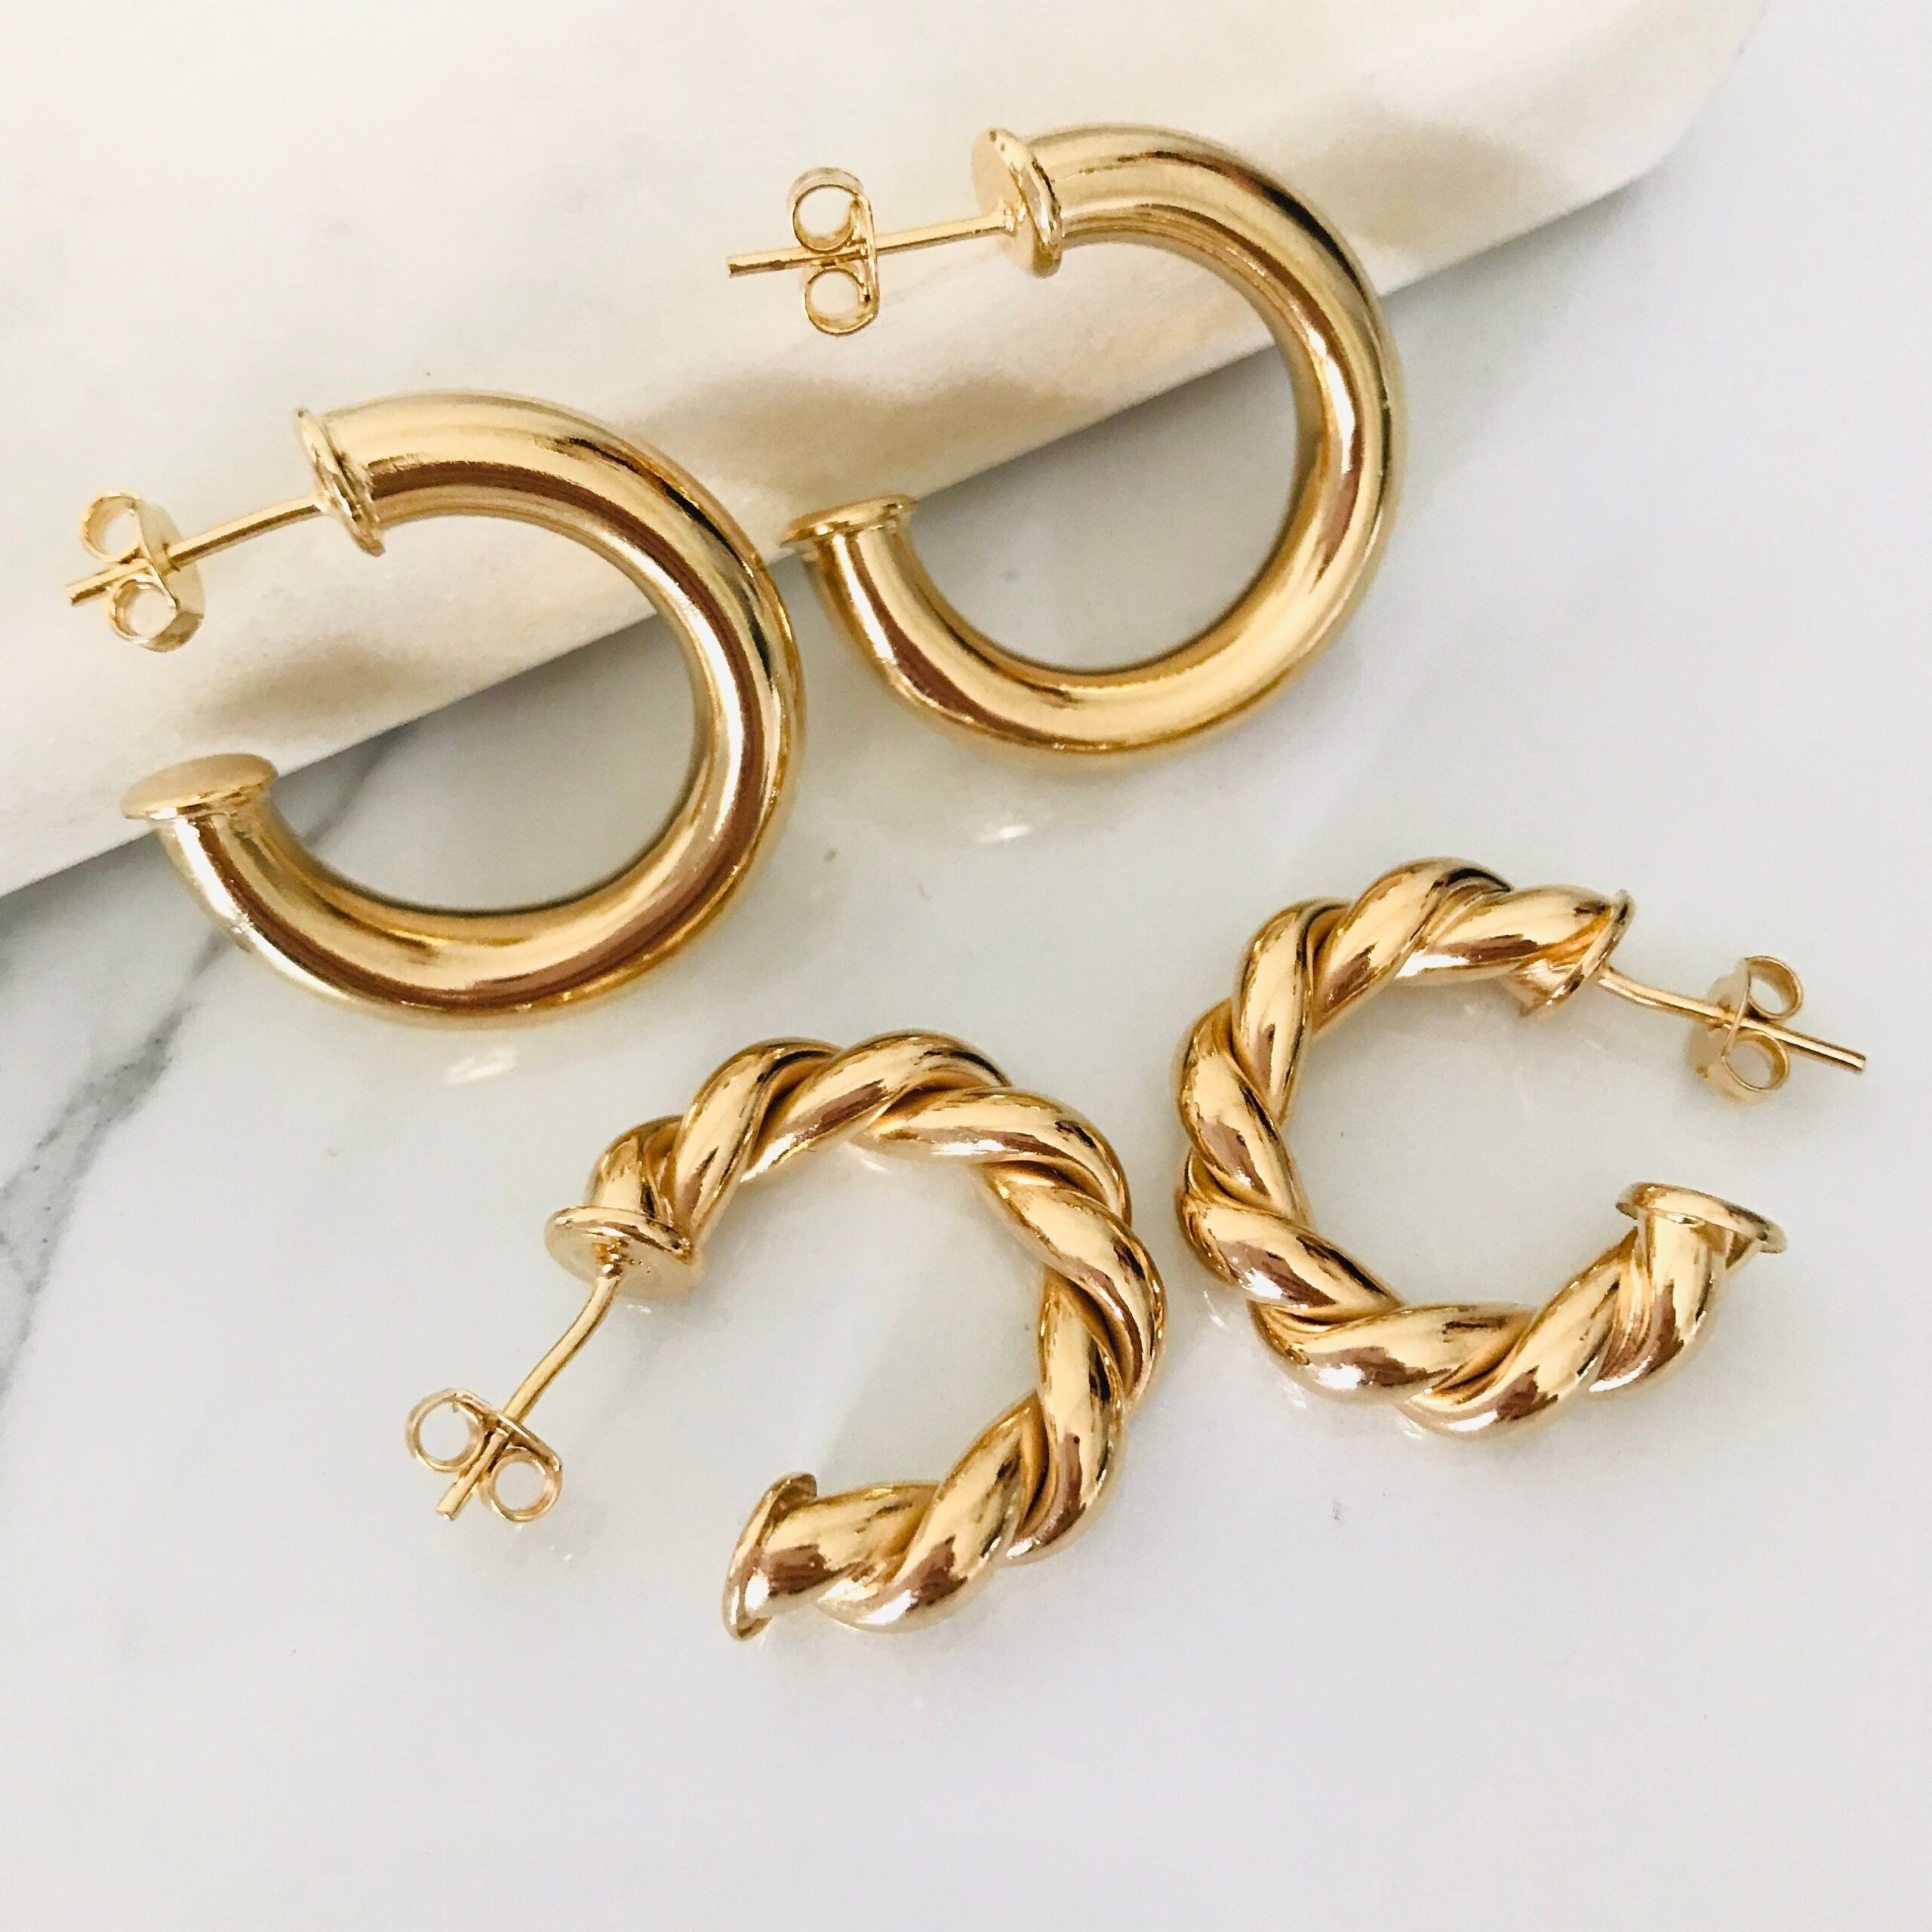 Make your own style with modern touch of trendy earrings